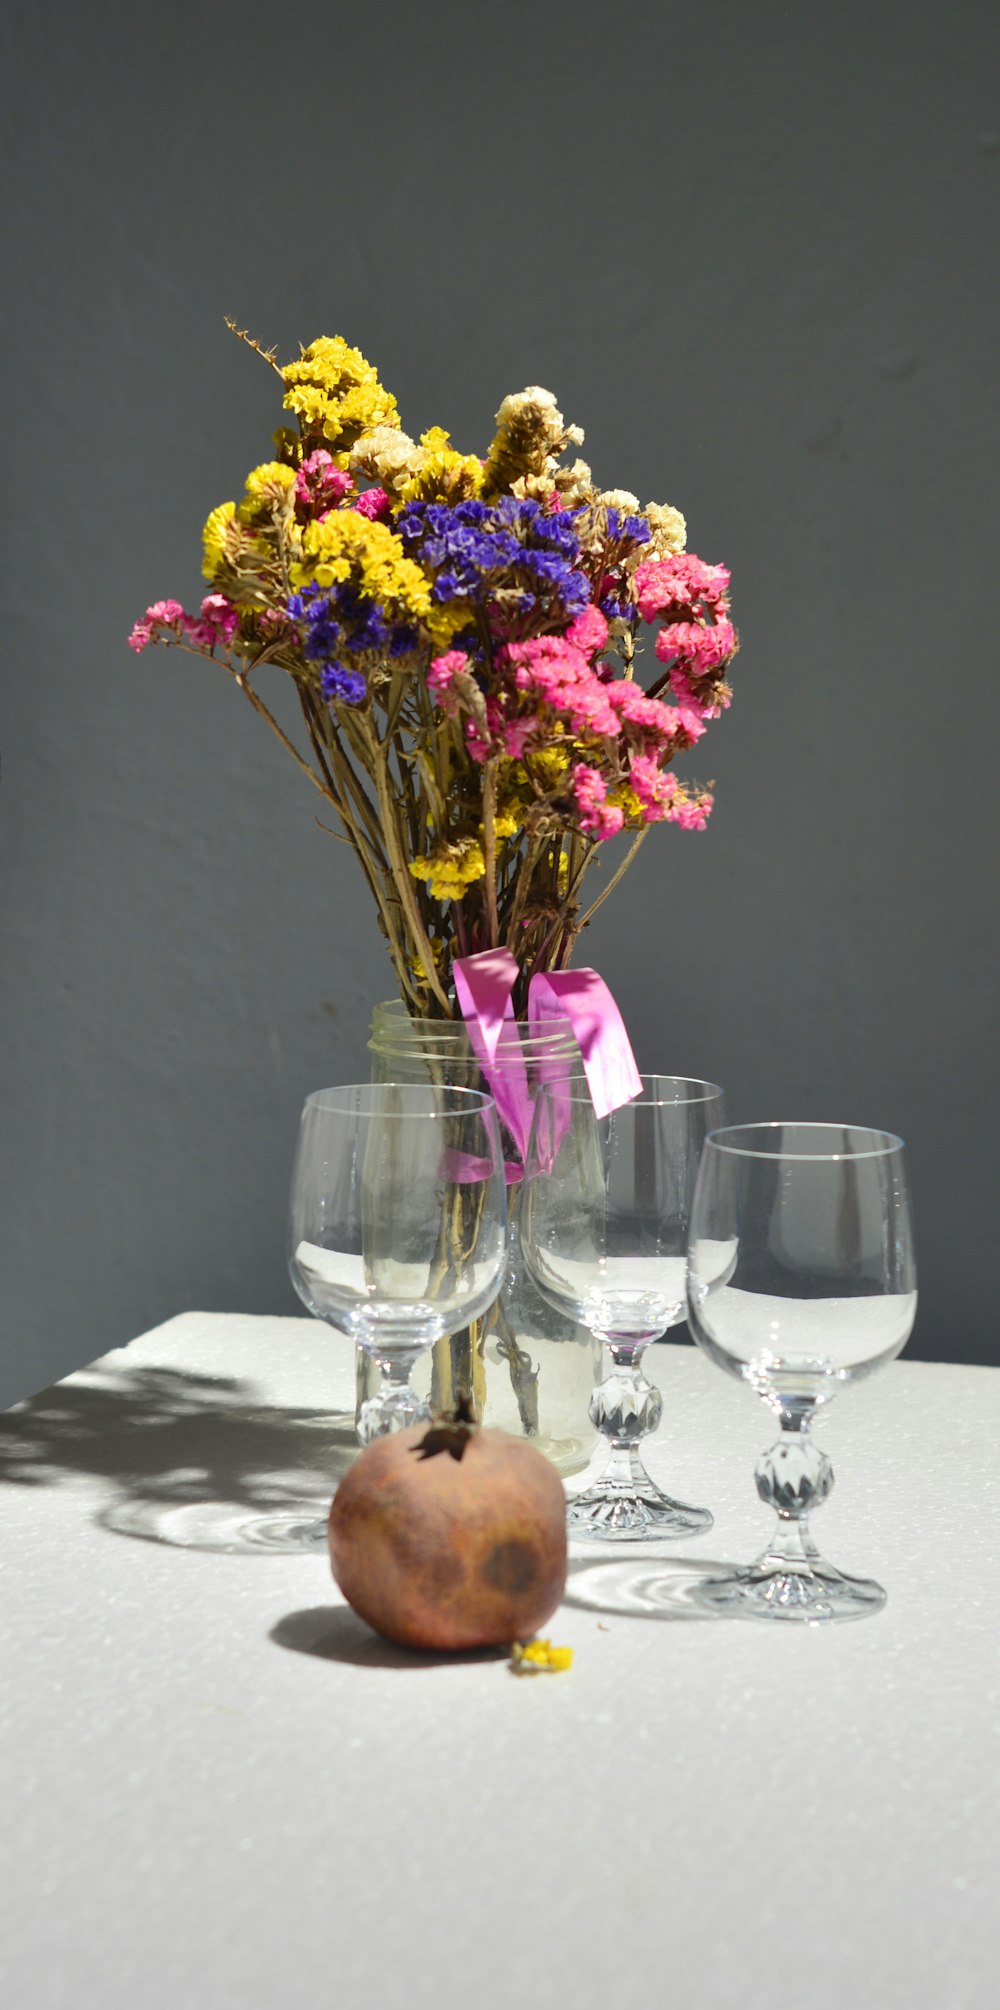 purple and yellow flowers in clear glass vase on white table